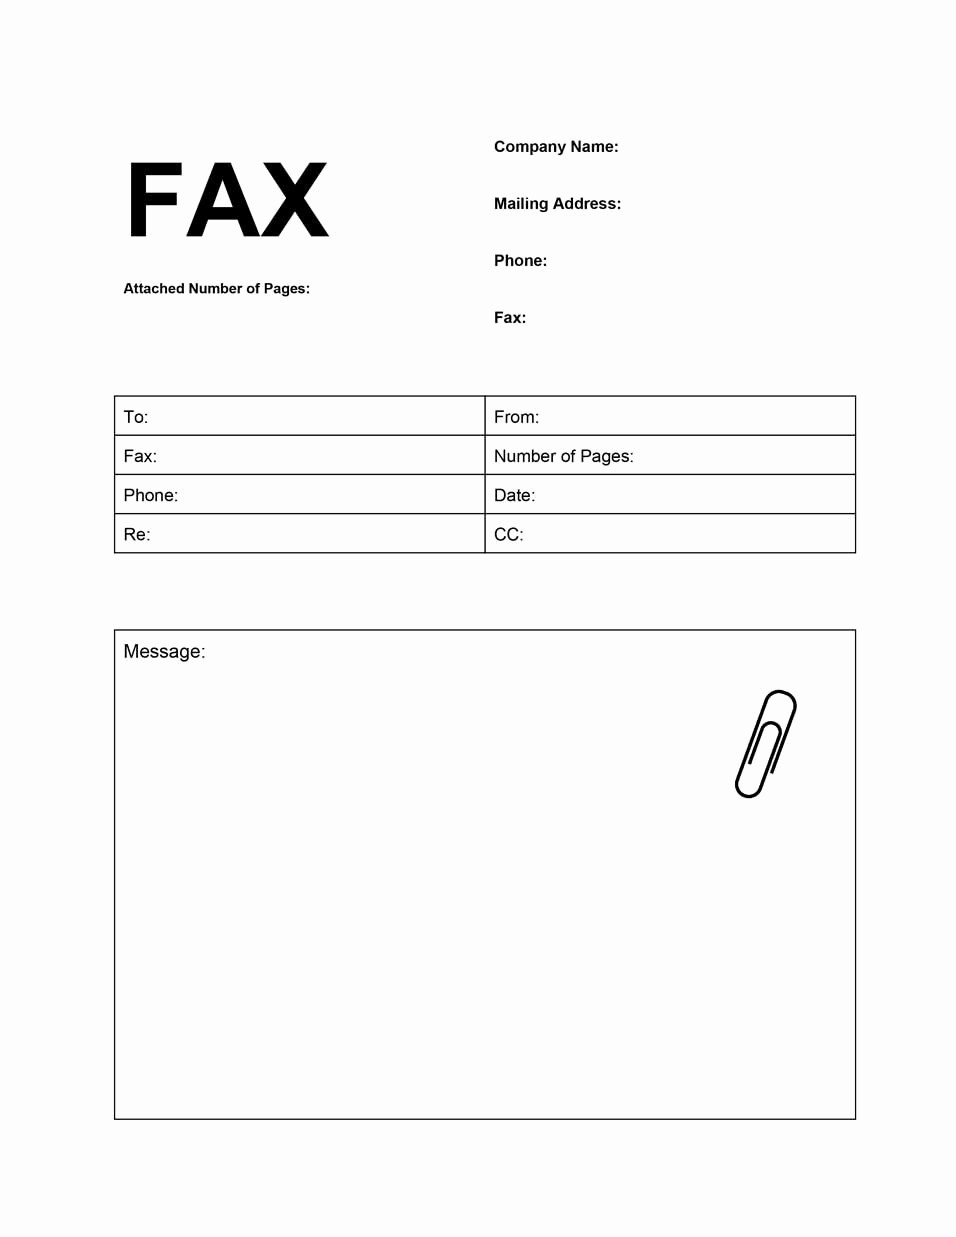 Fax Cover Sheet Printable Free Fresh attachment Fax Cover Sheet